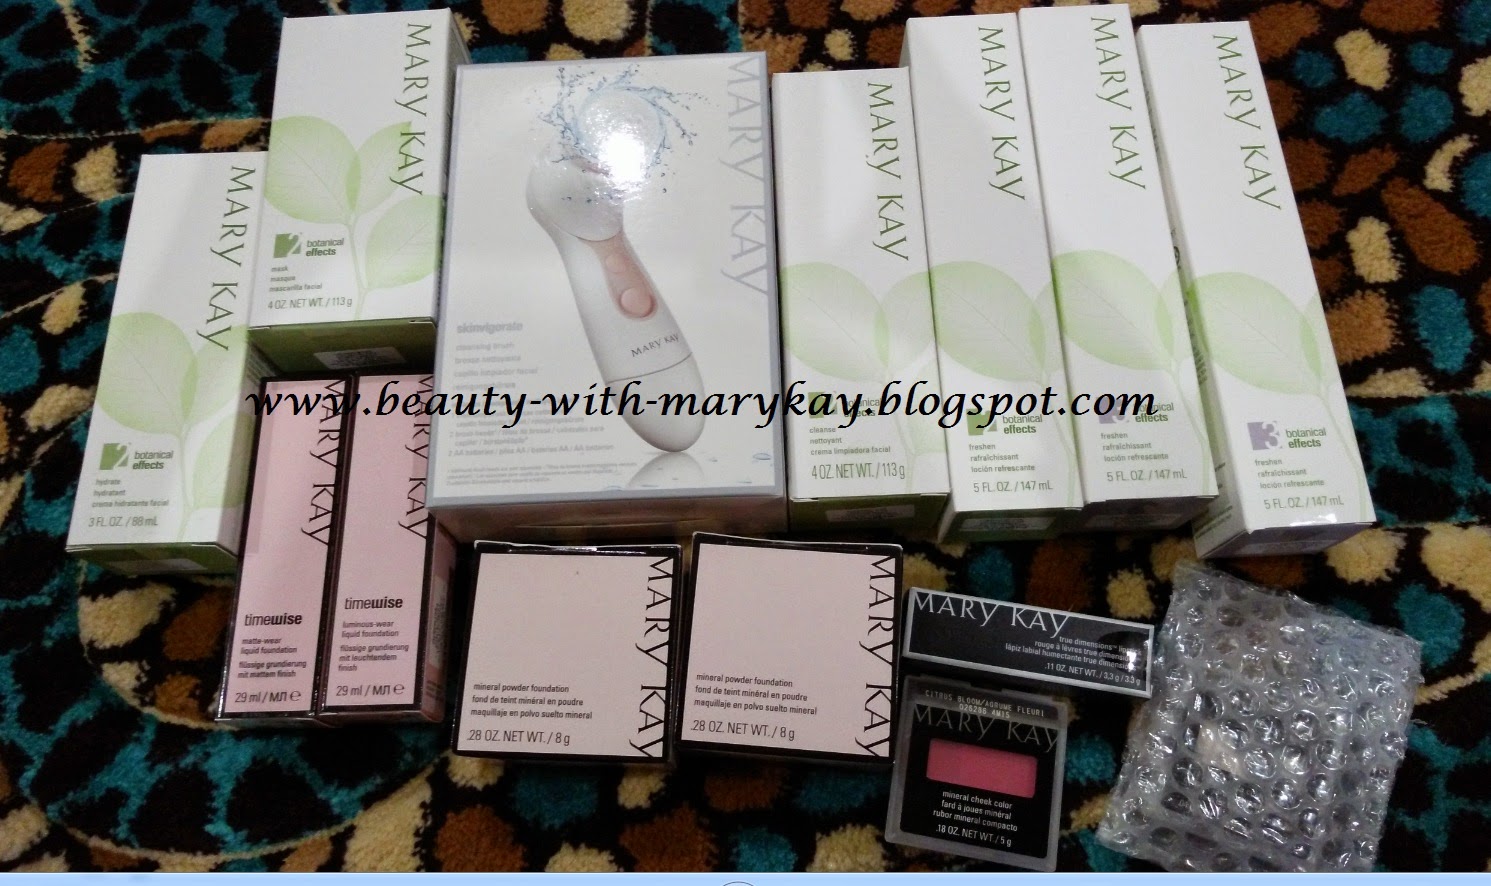 oily free hydrating gel mary kay,  liquid foundation marykay, gel mask, botanical skincare, timewise,regena skincare mary kay, serum c mary kay, regena day treatment, regena night treatment, regena intensive serum  cc cream, soothing eye gel, makeu finishing spray, mary kay,  liptstik mary kay, foundation primer,  eye color mary kay, eye brow definer, marcara mary kay, mineral powder mary kay, translucent loose powder, soothing eye gel lip mask, lip balm,hydrating  lotion, loofah body cleanser,makeup remover mary kay,acne mary kay , melacep skincare mary kay,skinvigorate cleansing brush,   oil free hydrating gel, gel mask, set jerawat mary kay, melacep pluss ultimate serum, peach satin hand pampering set, testimoni produk mary kay, sheer mineral pressed powder, beauty consultant mary kay, kerjaya di mary kay, business mary kay